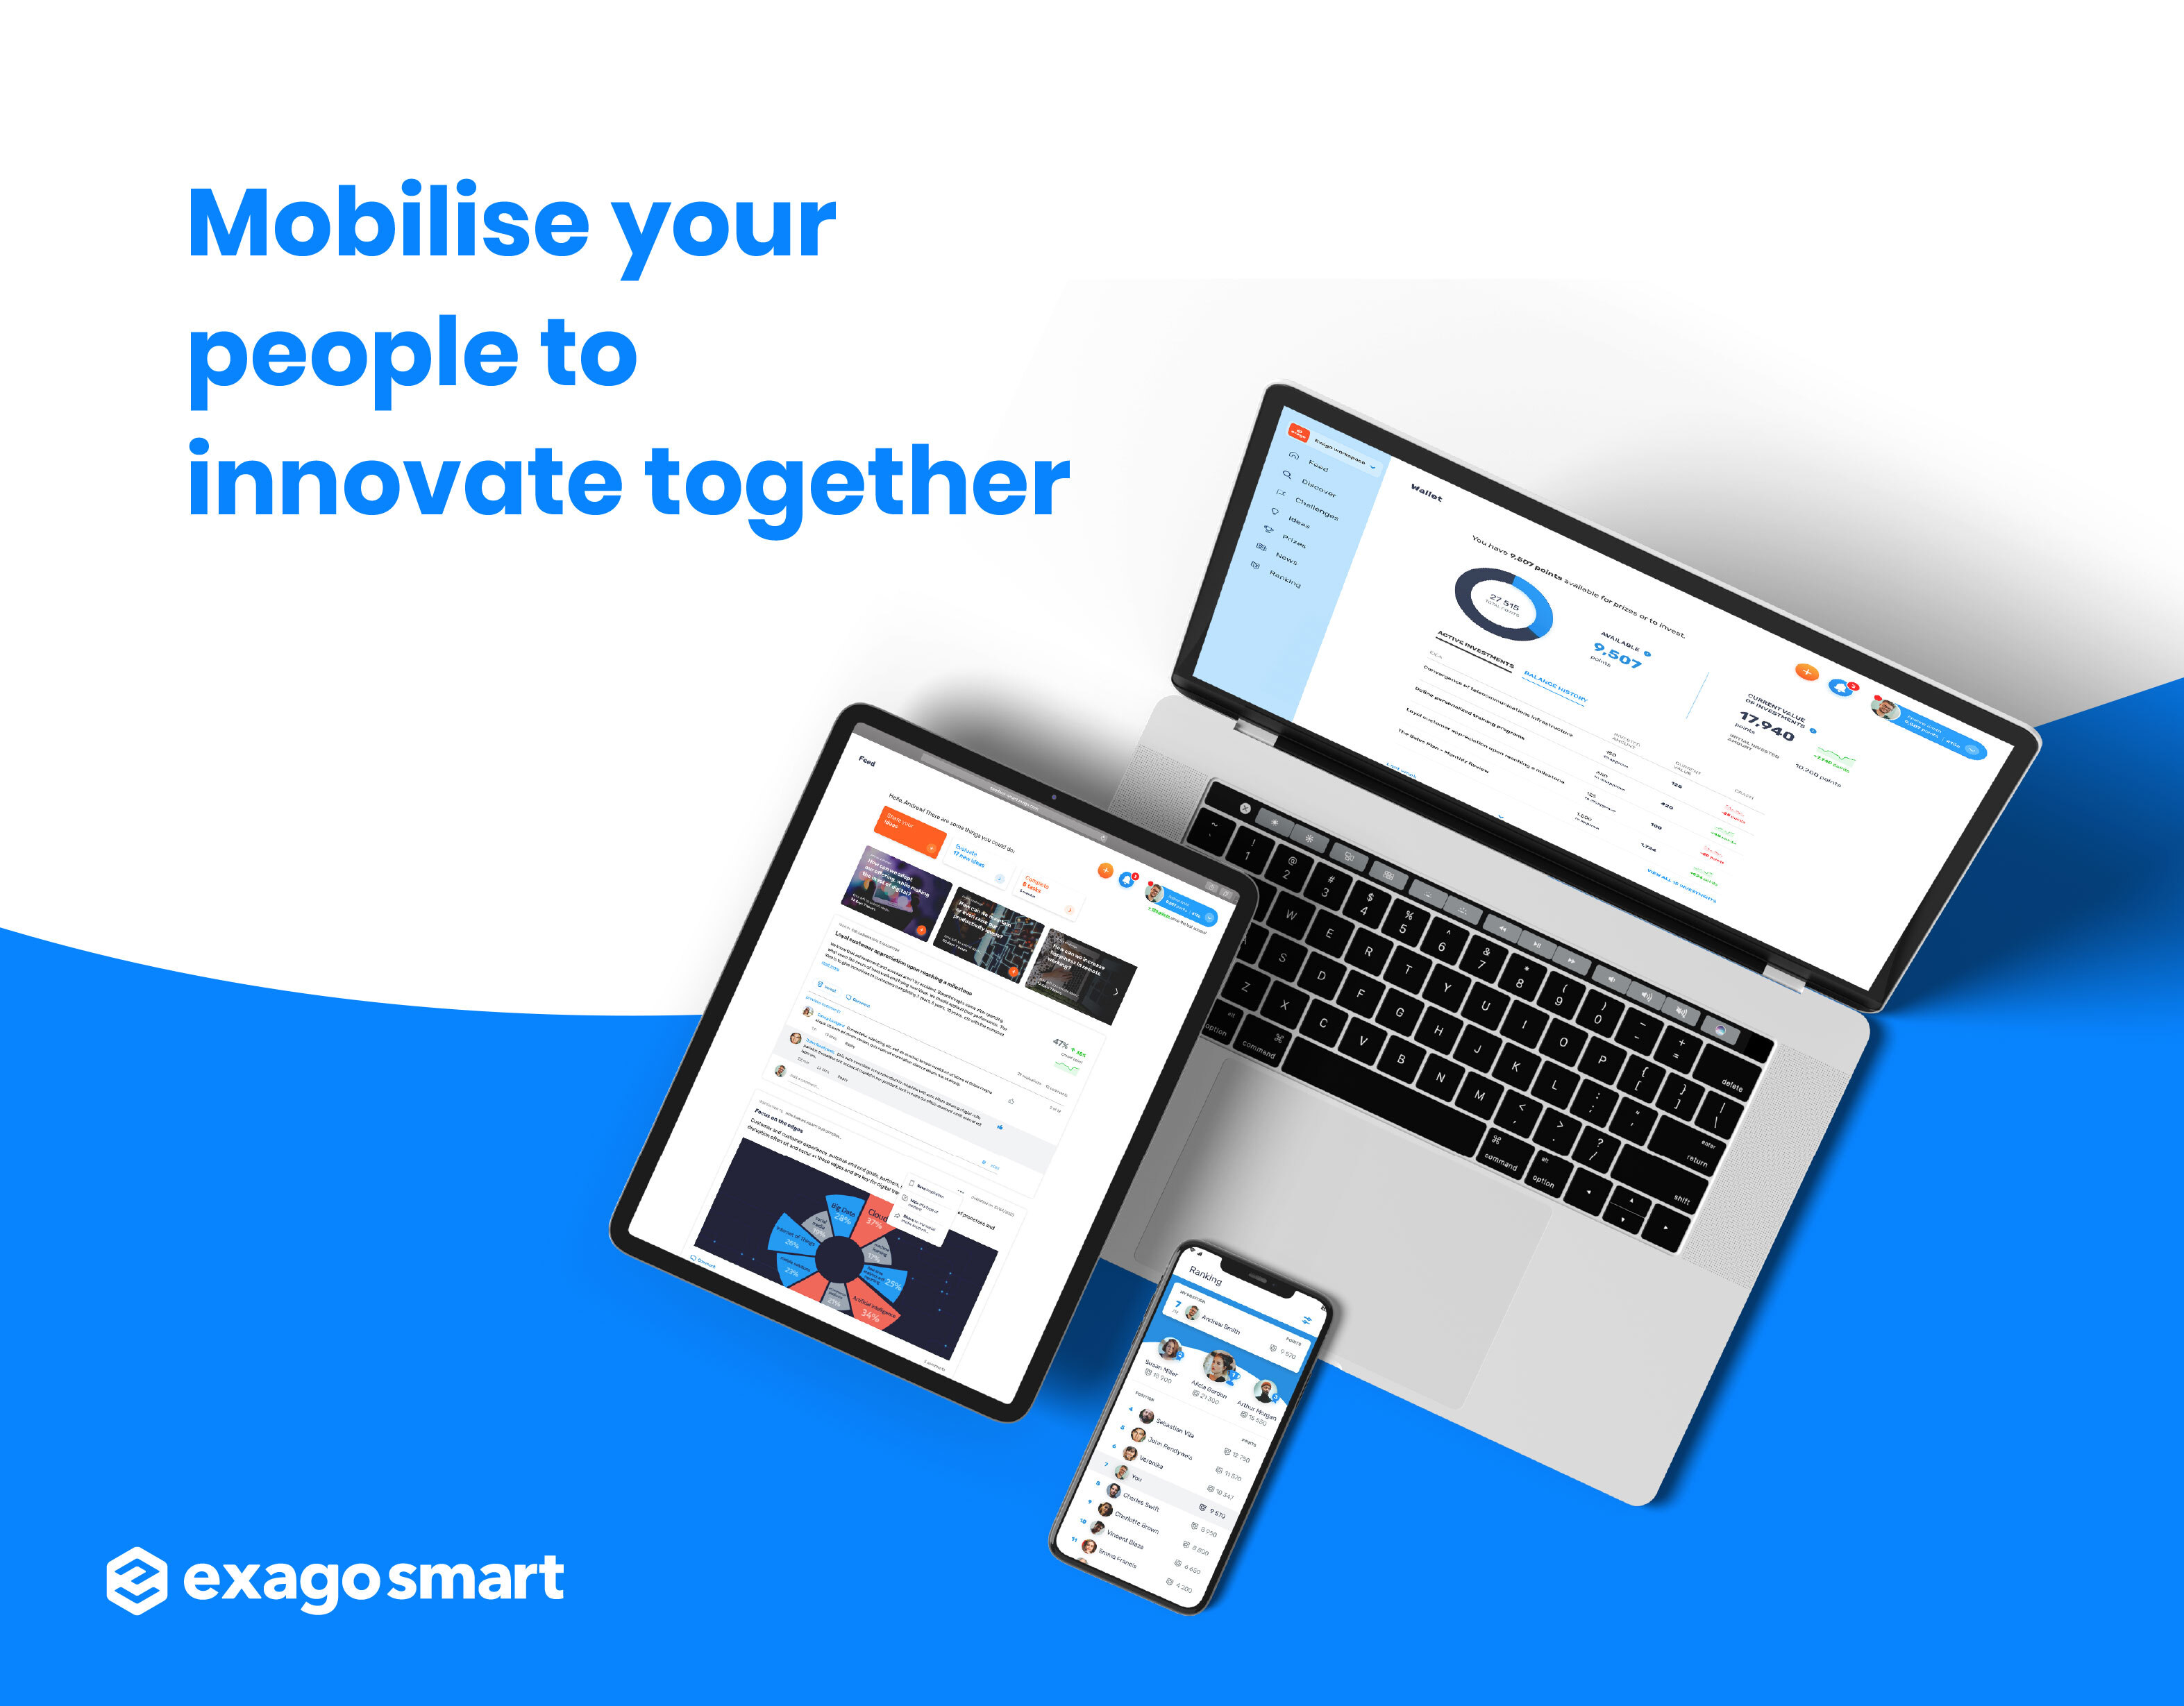 Mobilise your people to innovate together